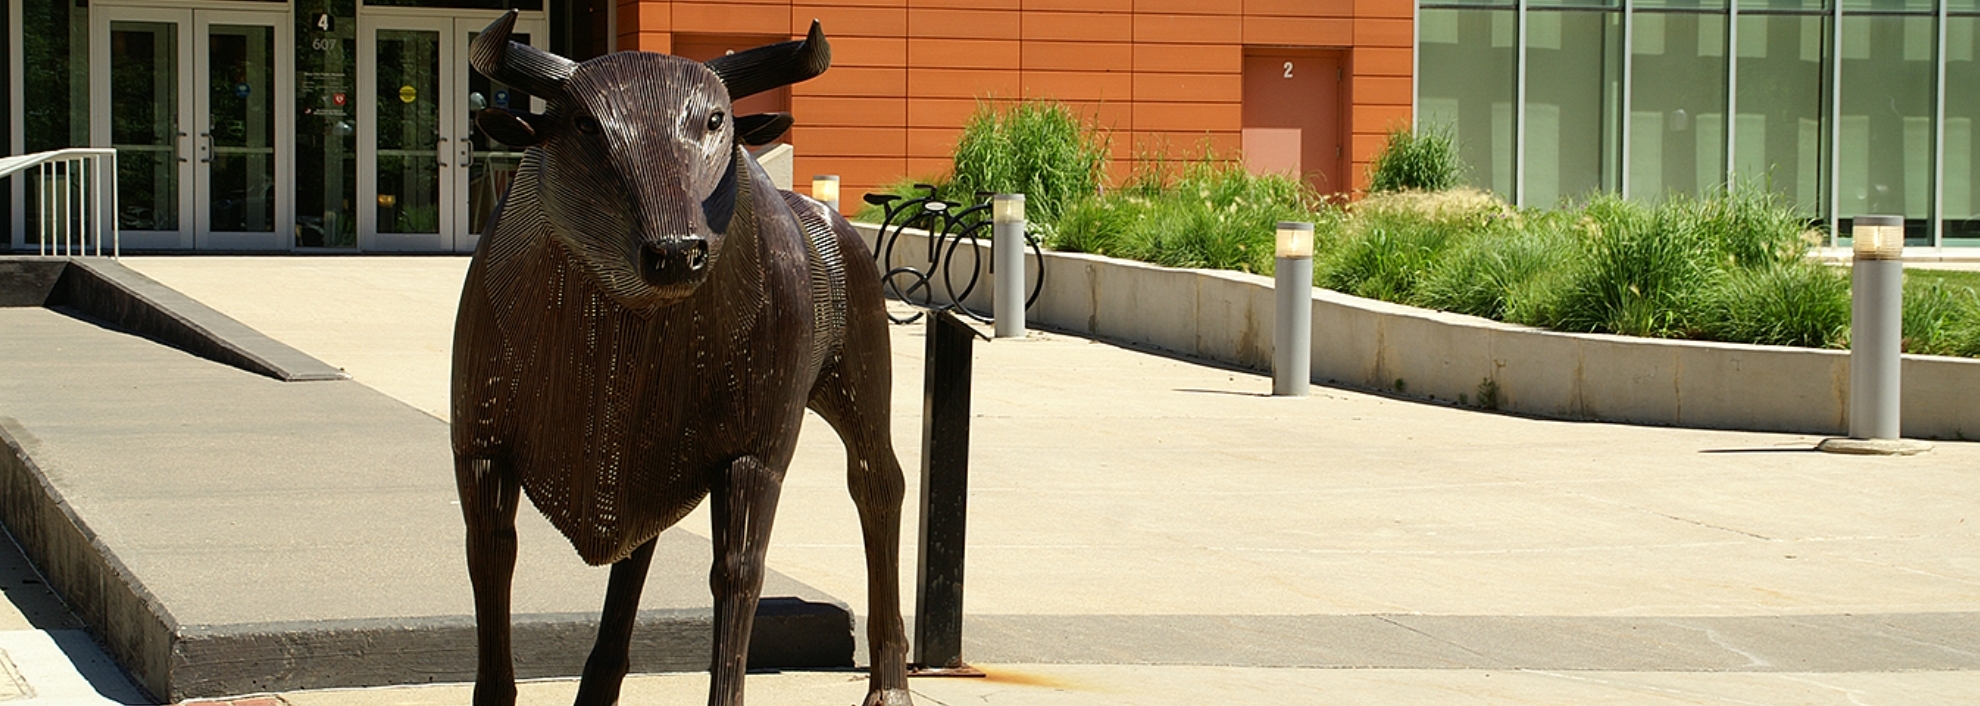 Statue of Bull outside of Sioux City Public Museum